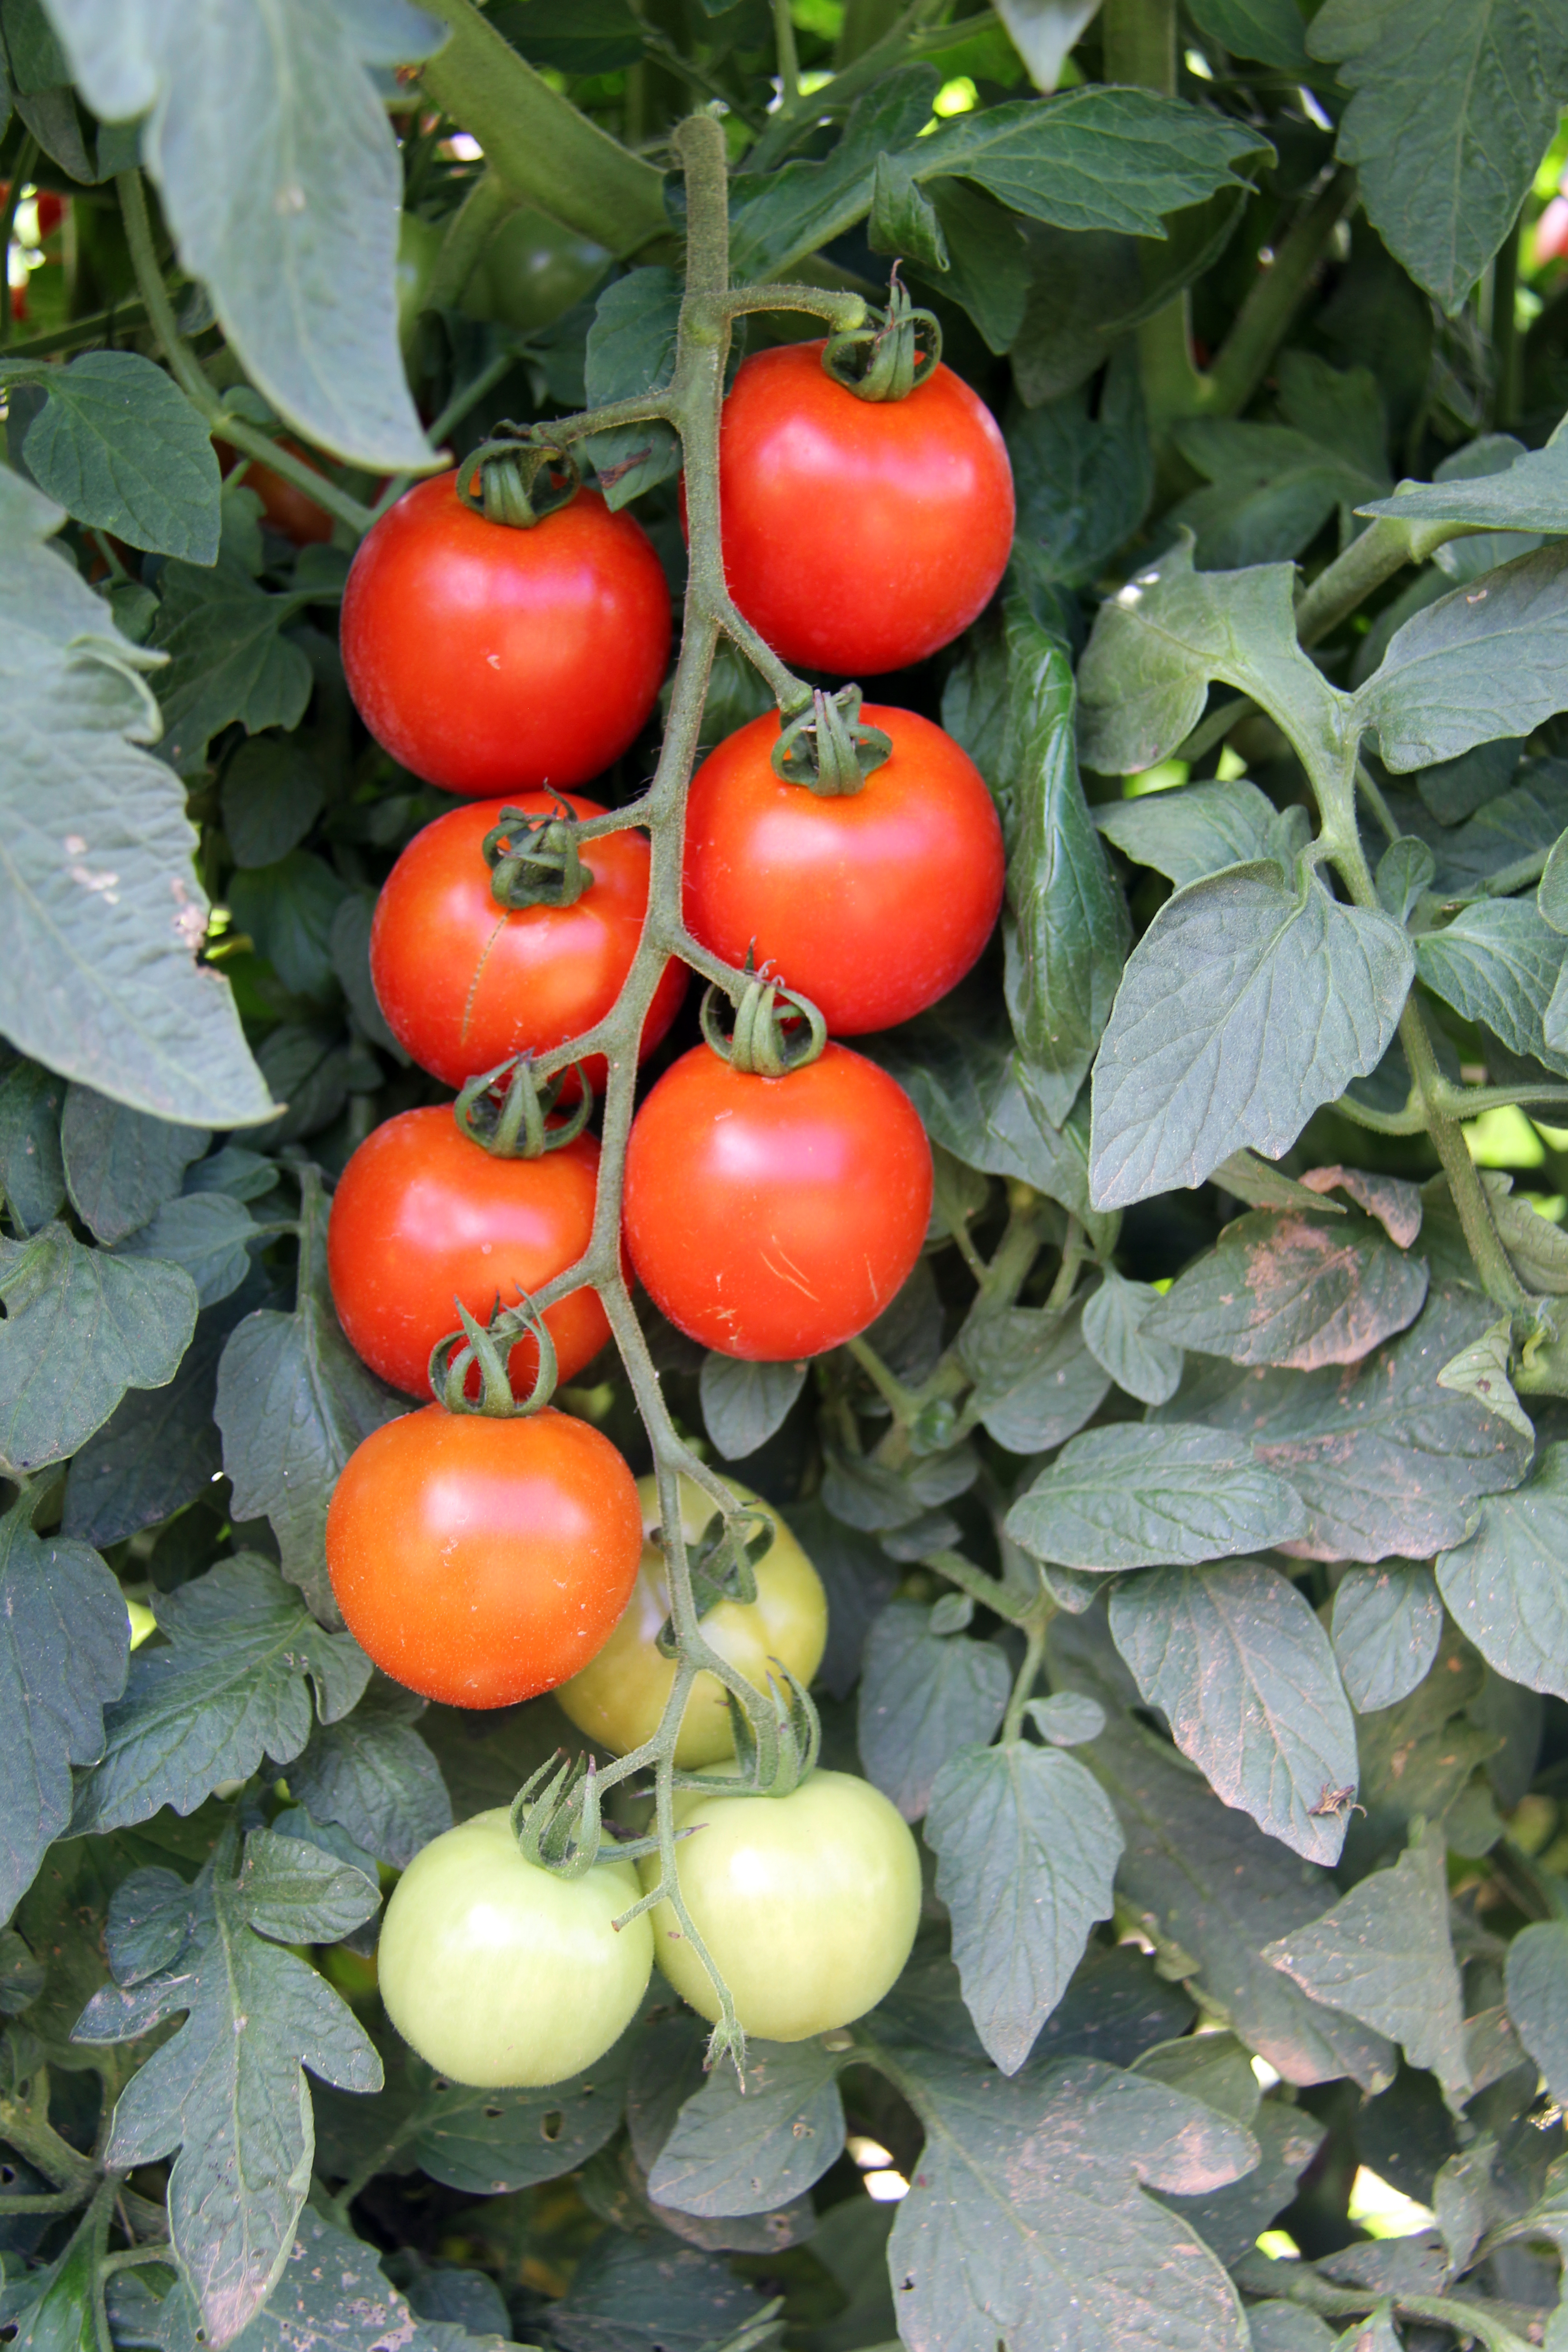 231 show original title Details about  / Mirabell Tomato Tomato Seeds NEW 2020 Harvest Organic Cultivation No